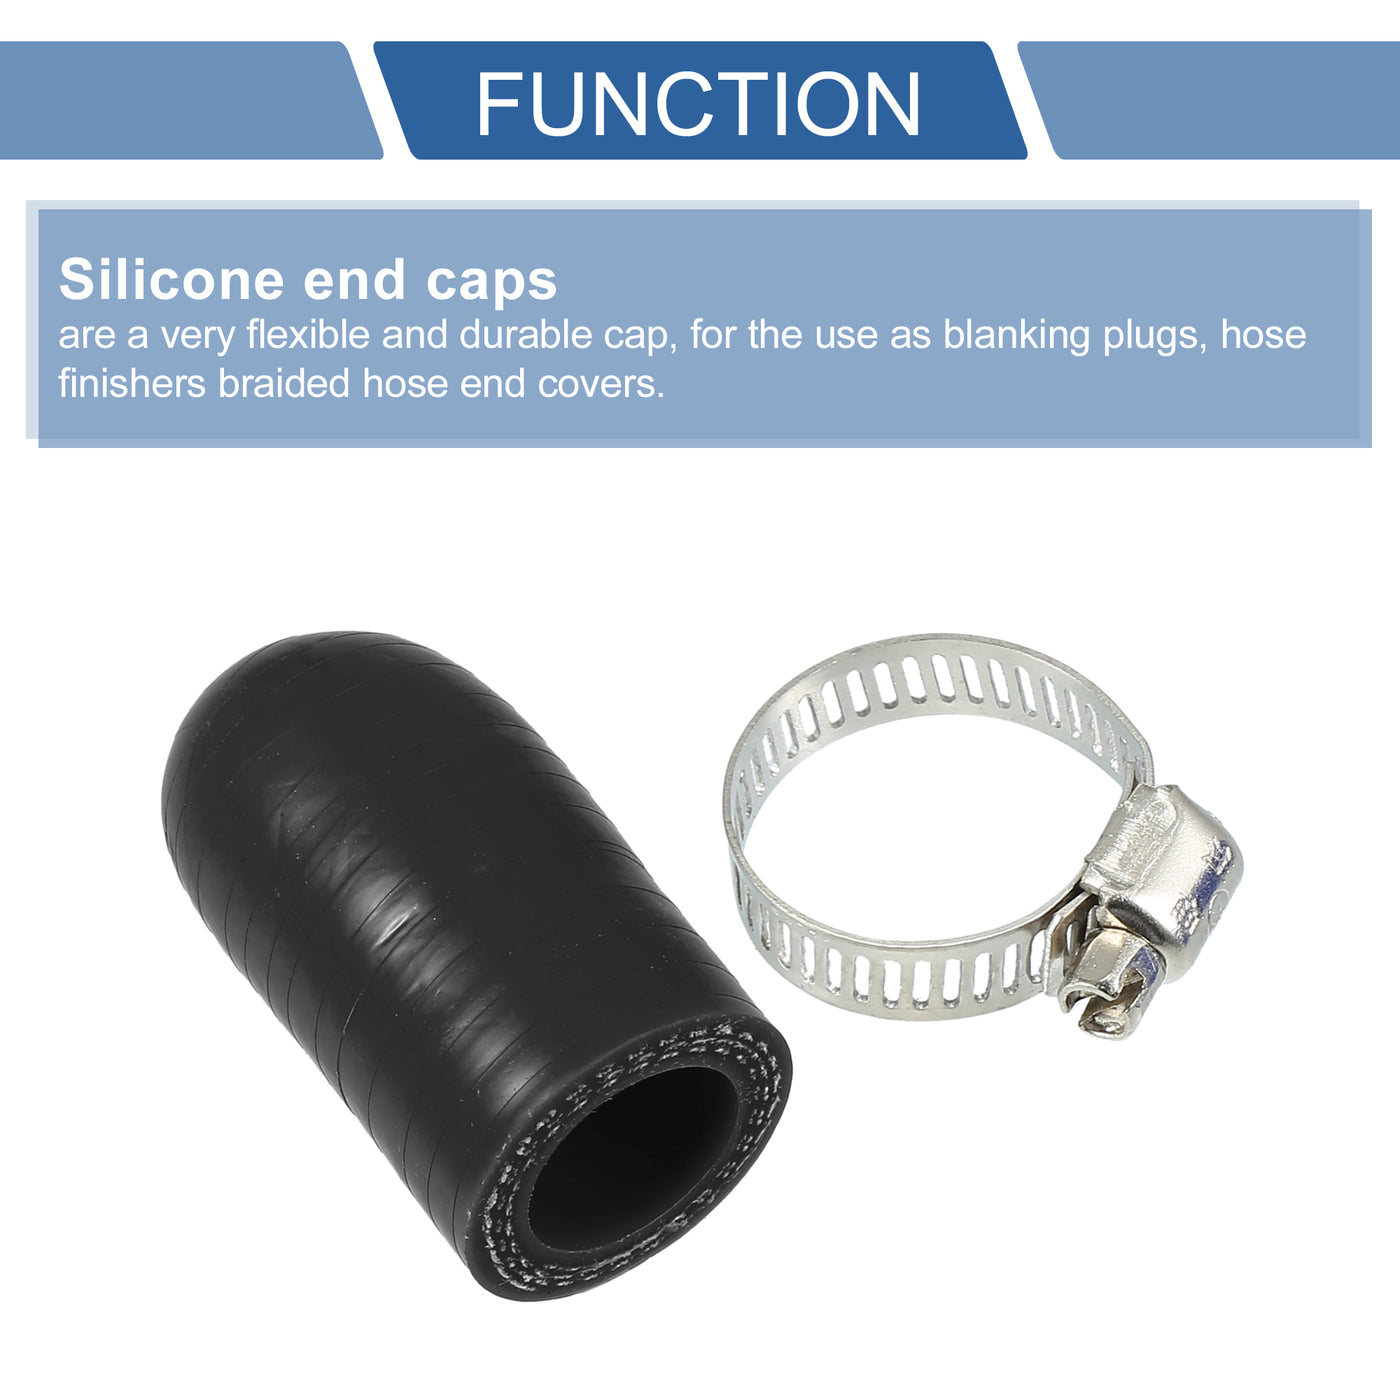 X AUTOHAUX 1 Set 30mm Length 16mm/0.63" ID Black Car Silicone Rubber Hose End Cap with Clamps Silicone Reinforced Blanking Cap for Bypass Tube Universal